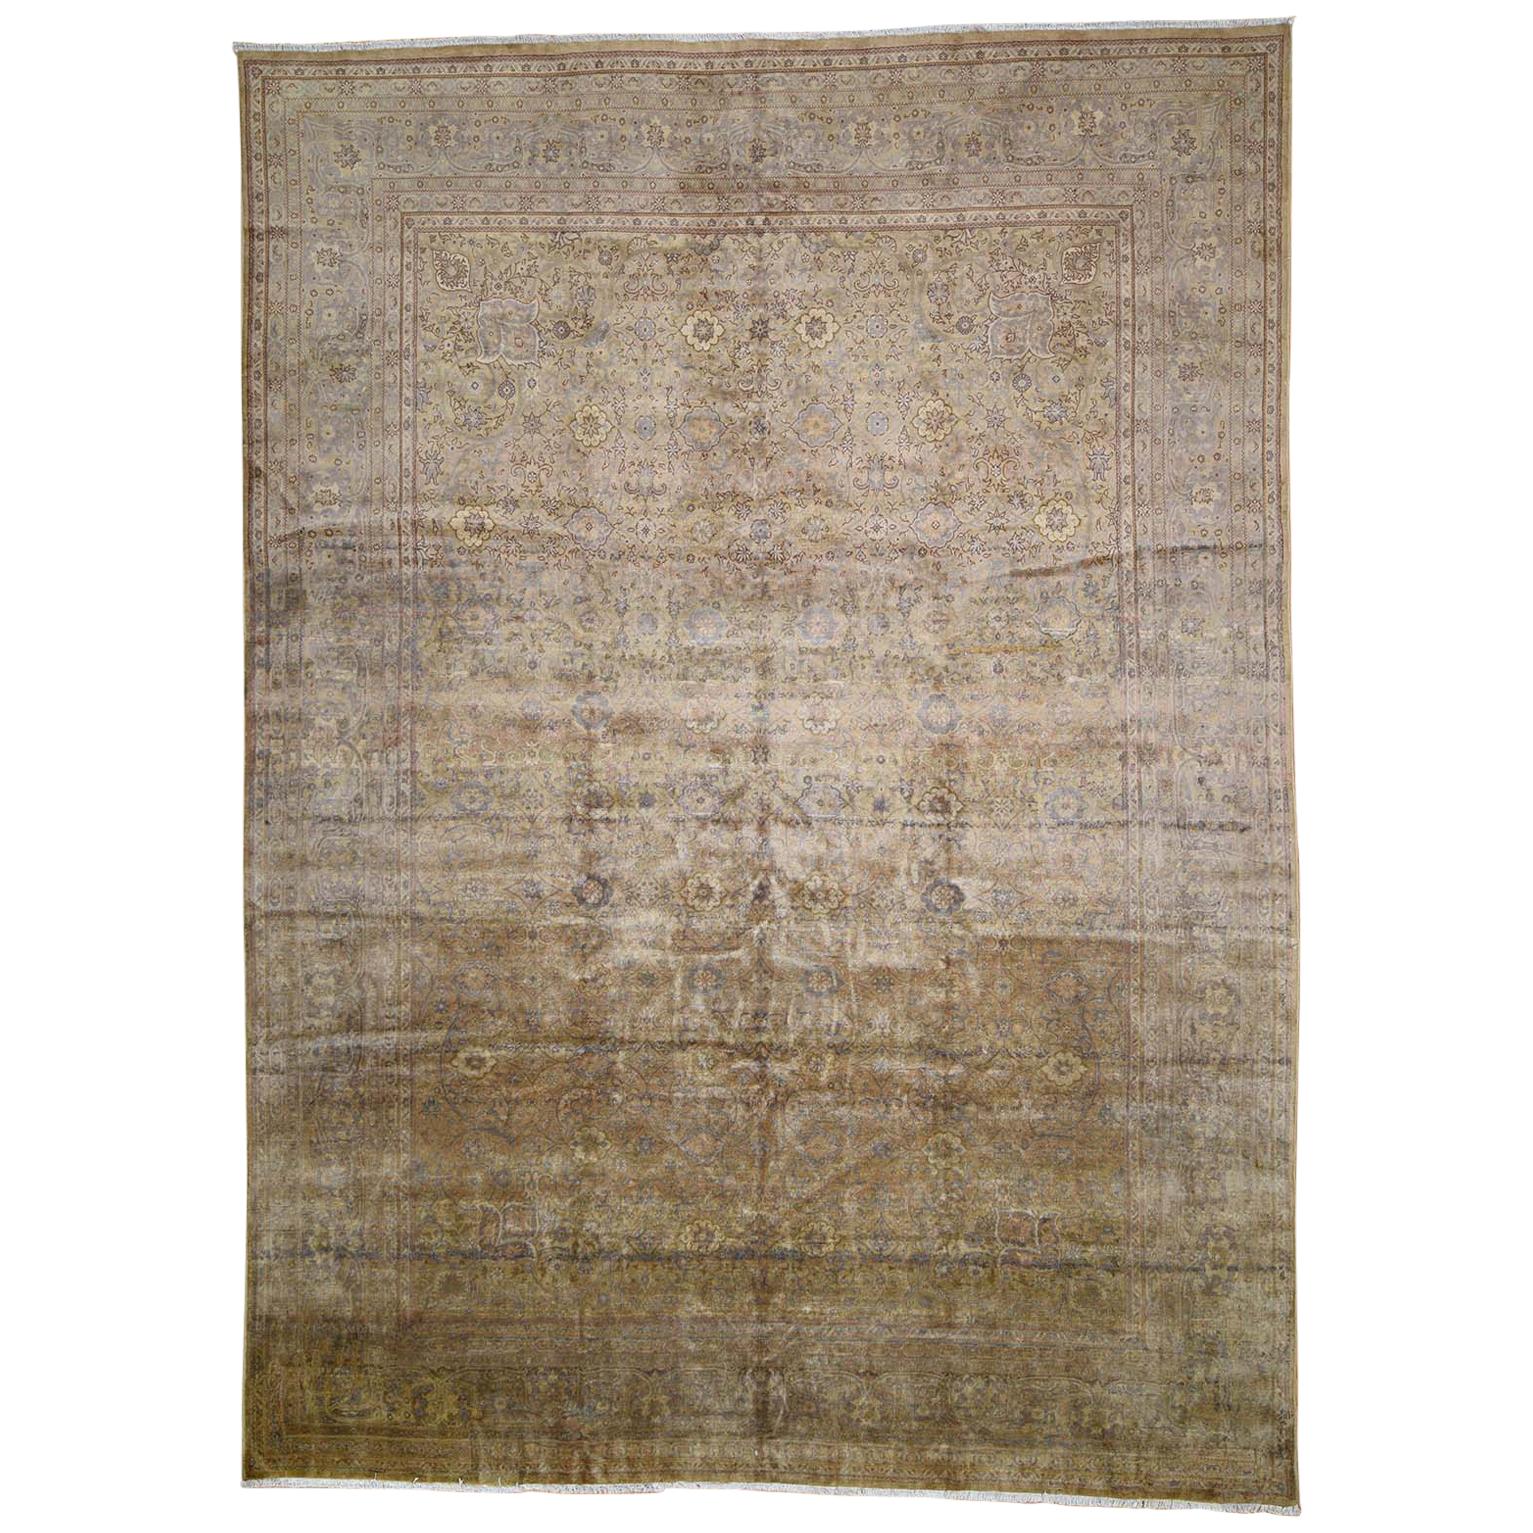 1920 Turkish Sivas Rug Even Wear and Soft, Camel and Beige For Sale